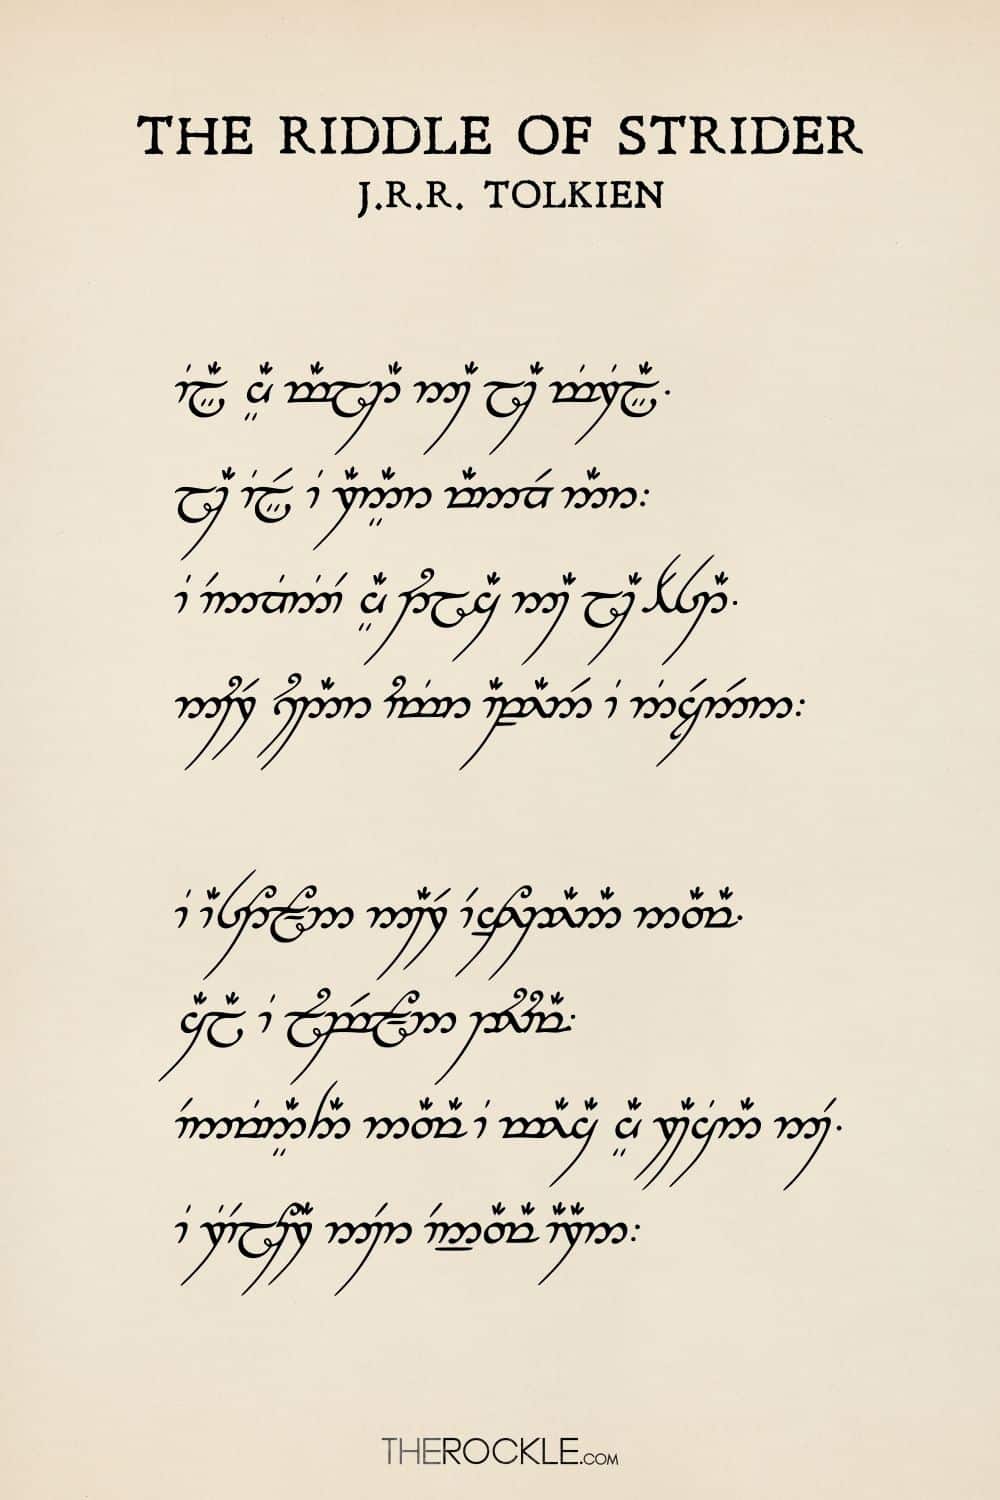 Tolkien's poem The Riddle of Strider on Quenya fictional language